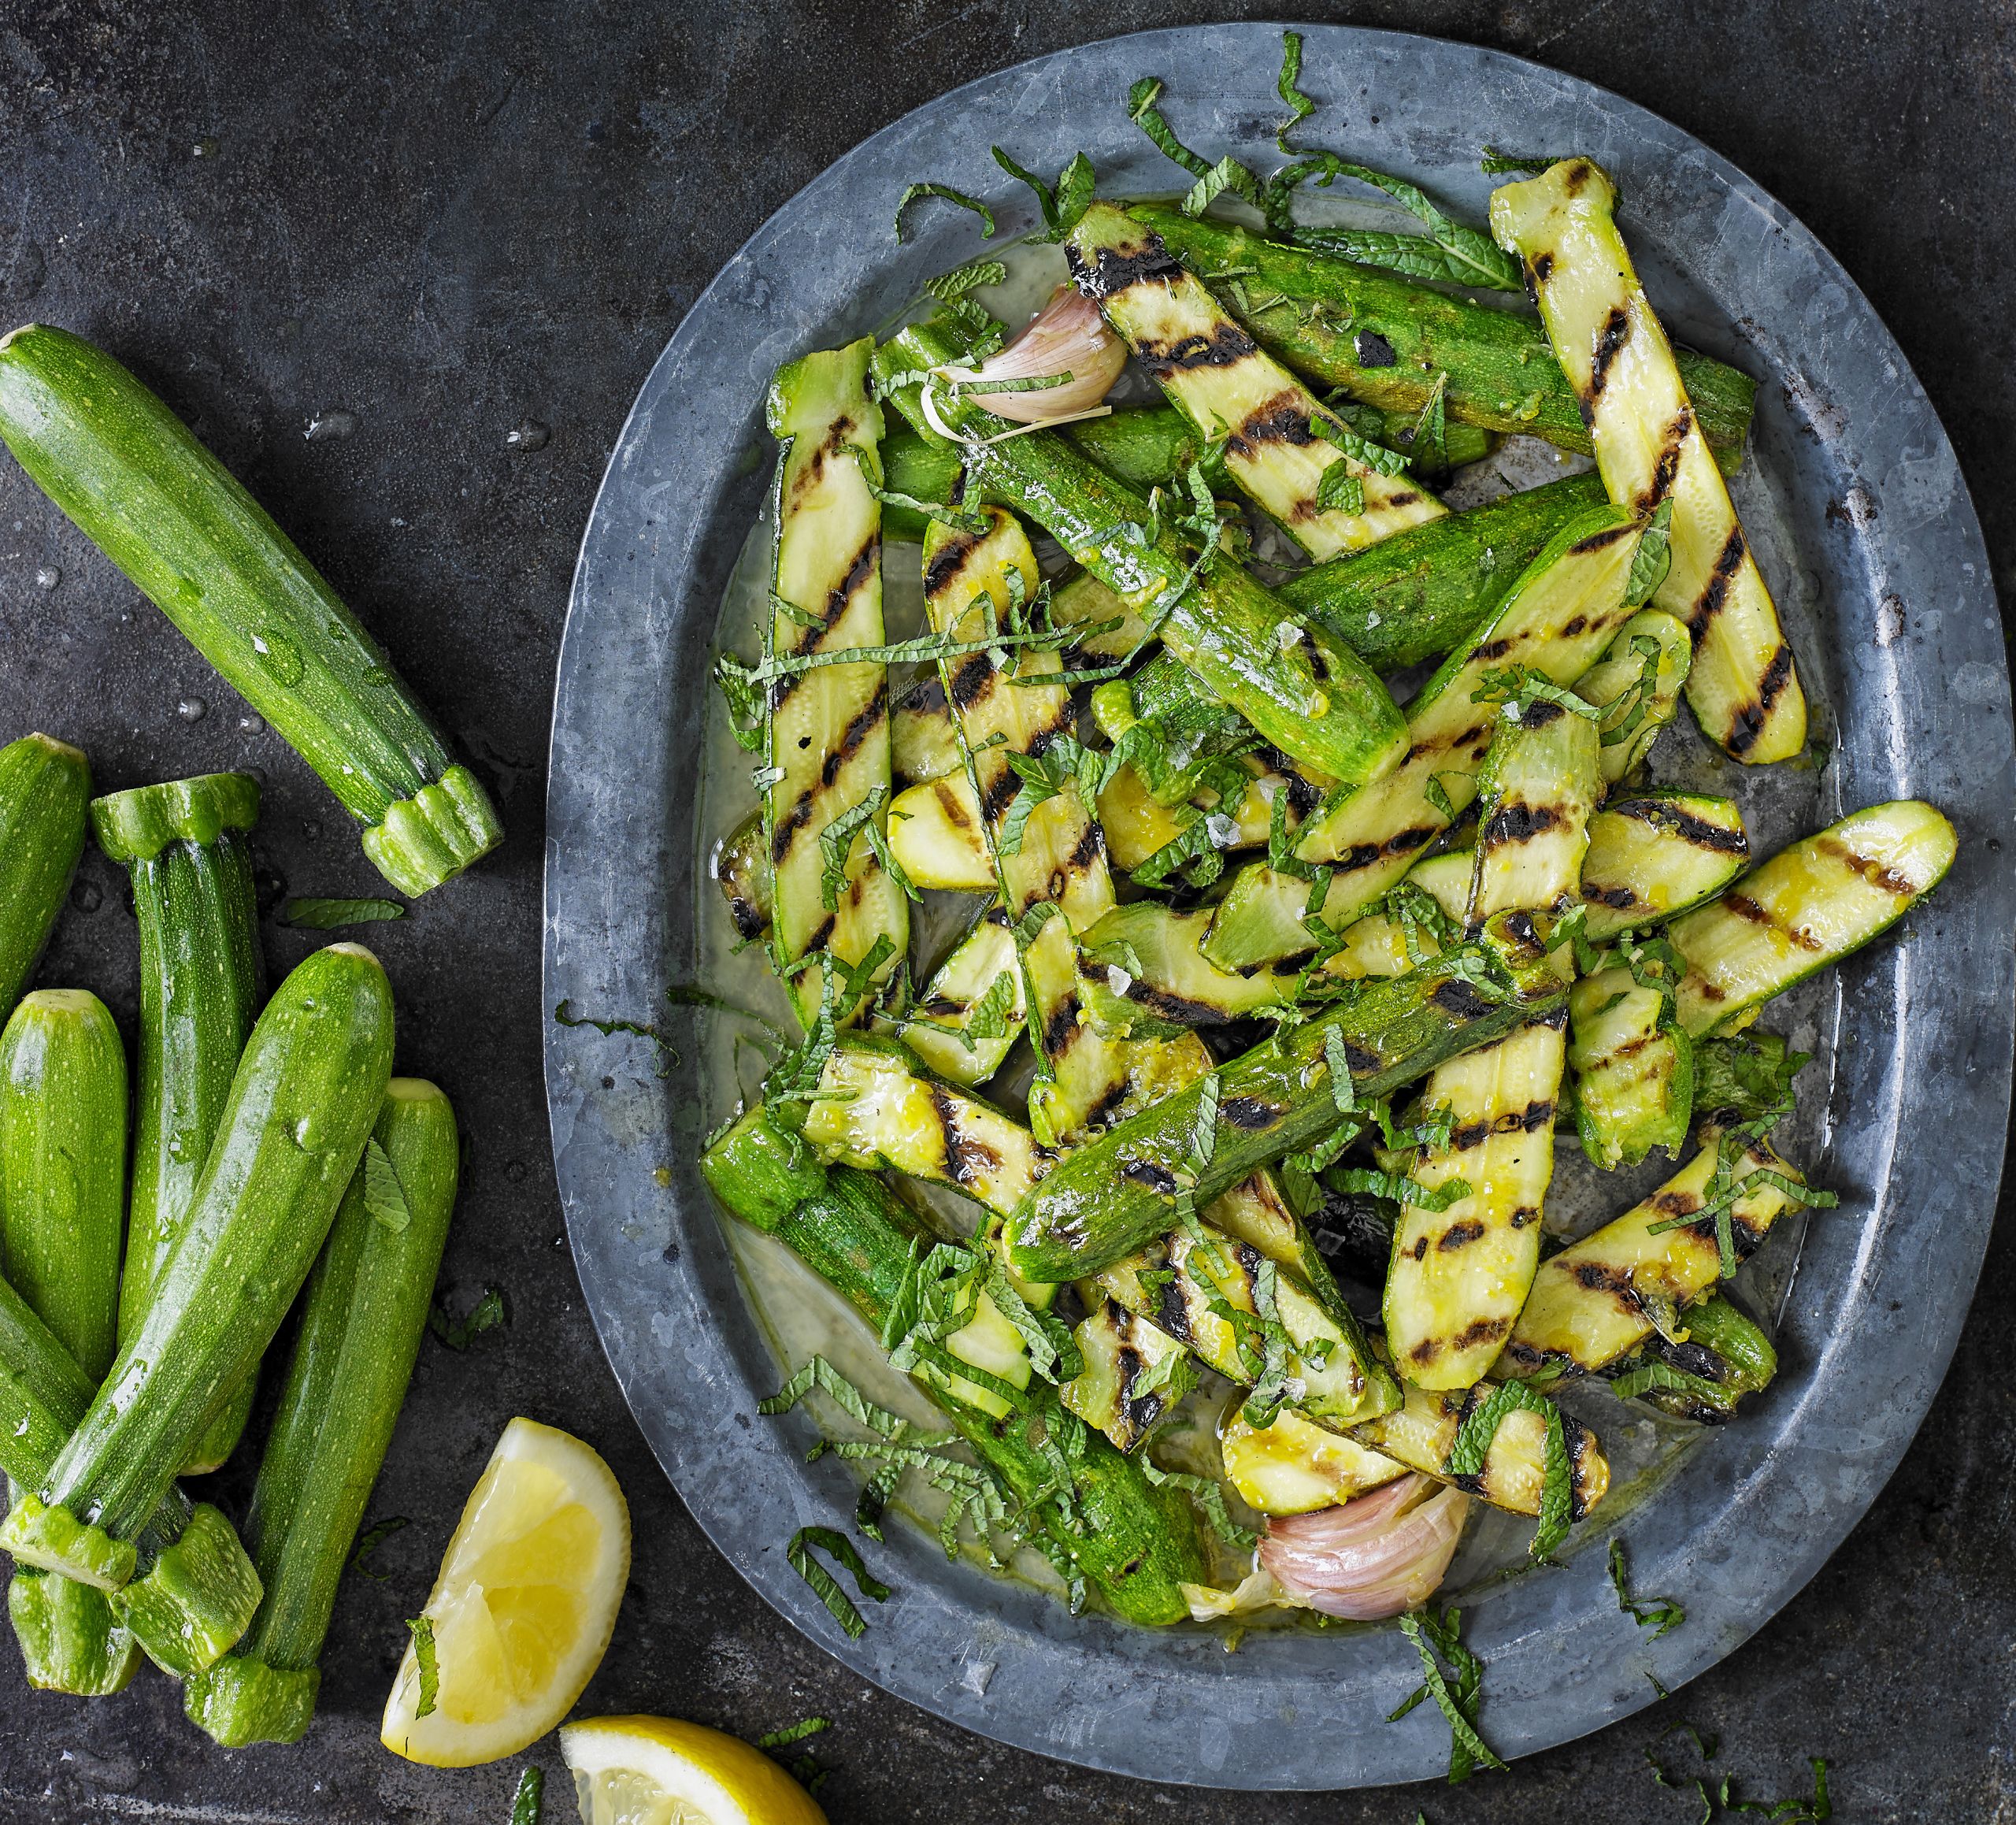 Vegetable Side Dishes for Bbq Inspirational 20 Ve Able Side Dishes for Summer Olive Magazine